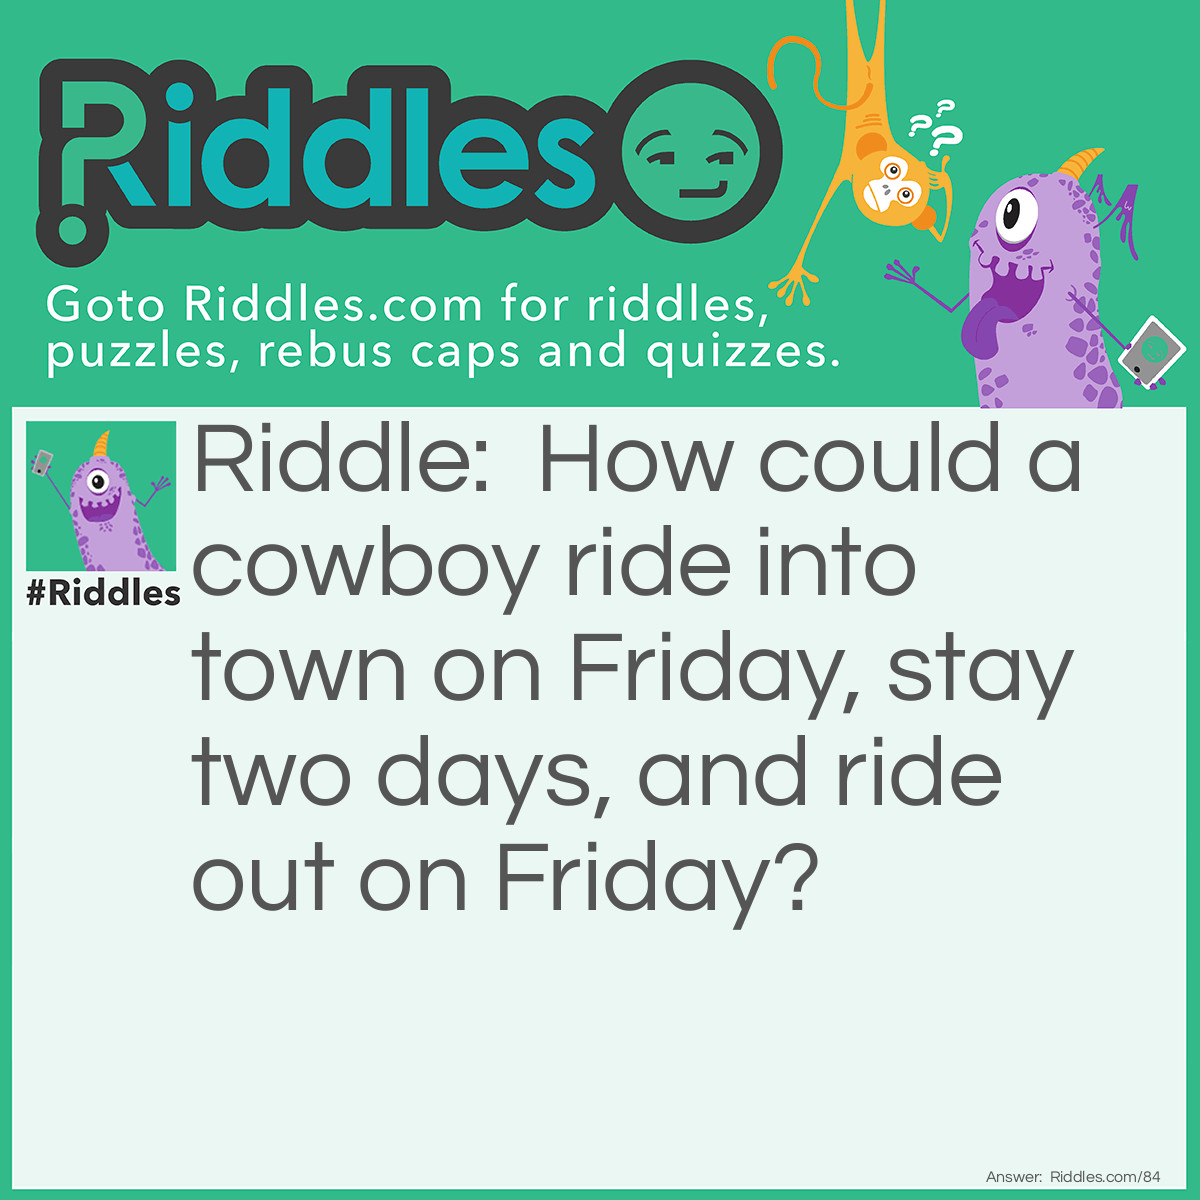 Riddle: How could a cowboy ride into town on Friday, stay two days, and ride out on Friday? Answer: His horse is named Friday.